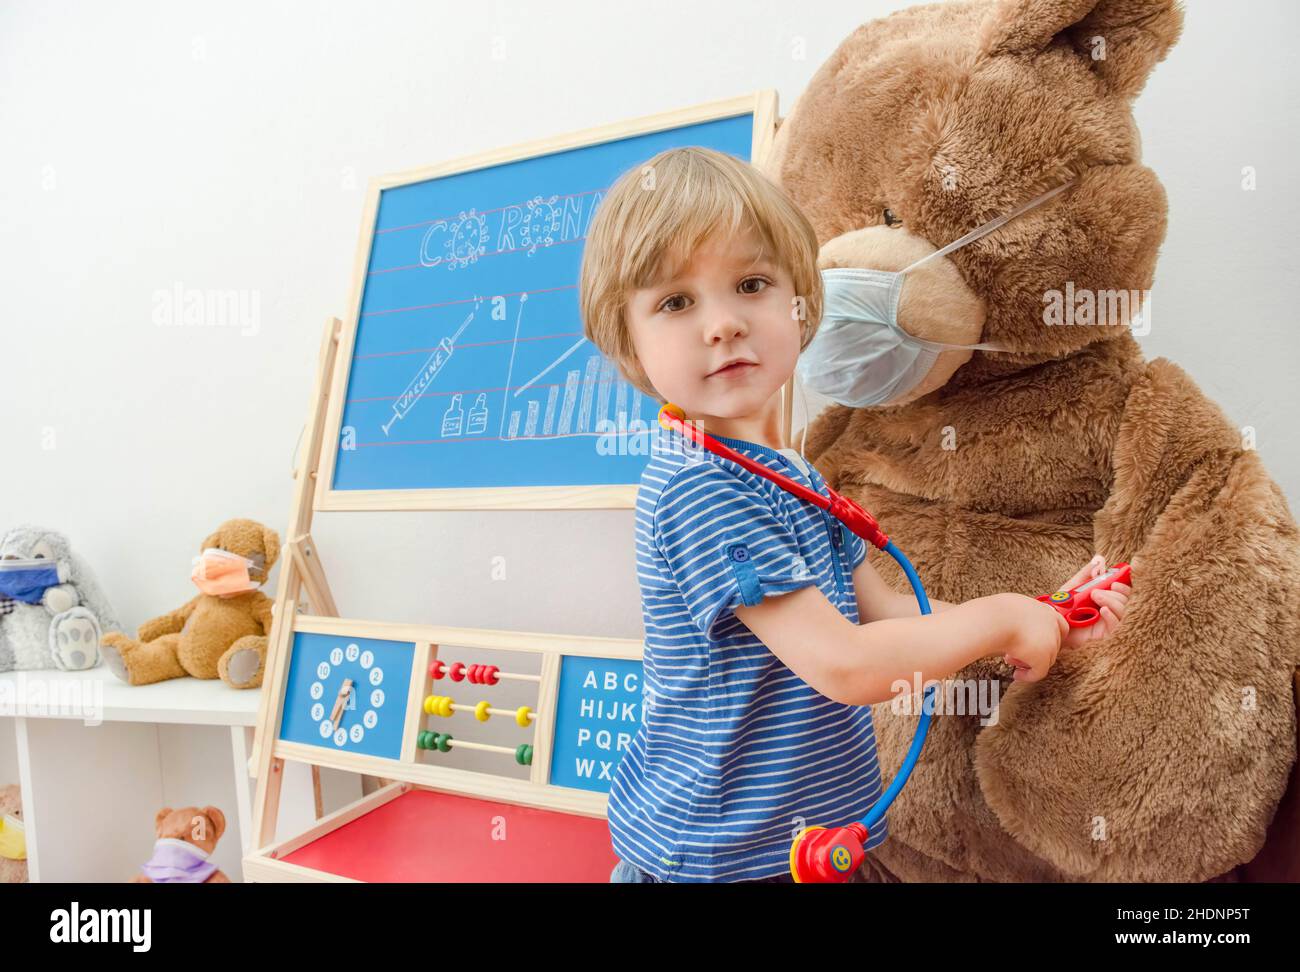 Cute child boy in home quarantine playing doctor with toys wearing medical masks, role playing during coronavirus pandemic lock down Stock Photo